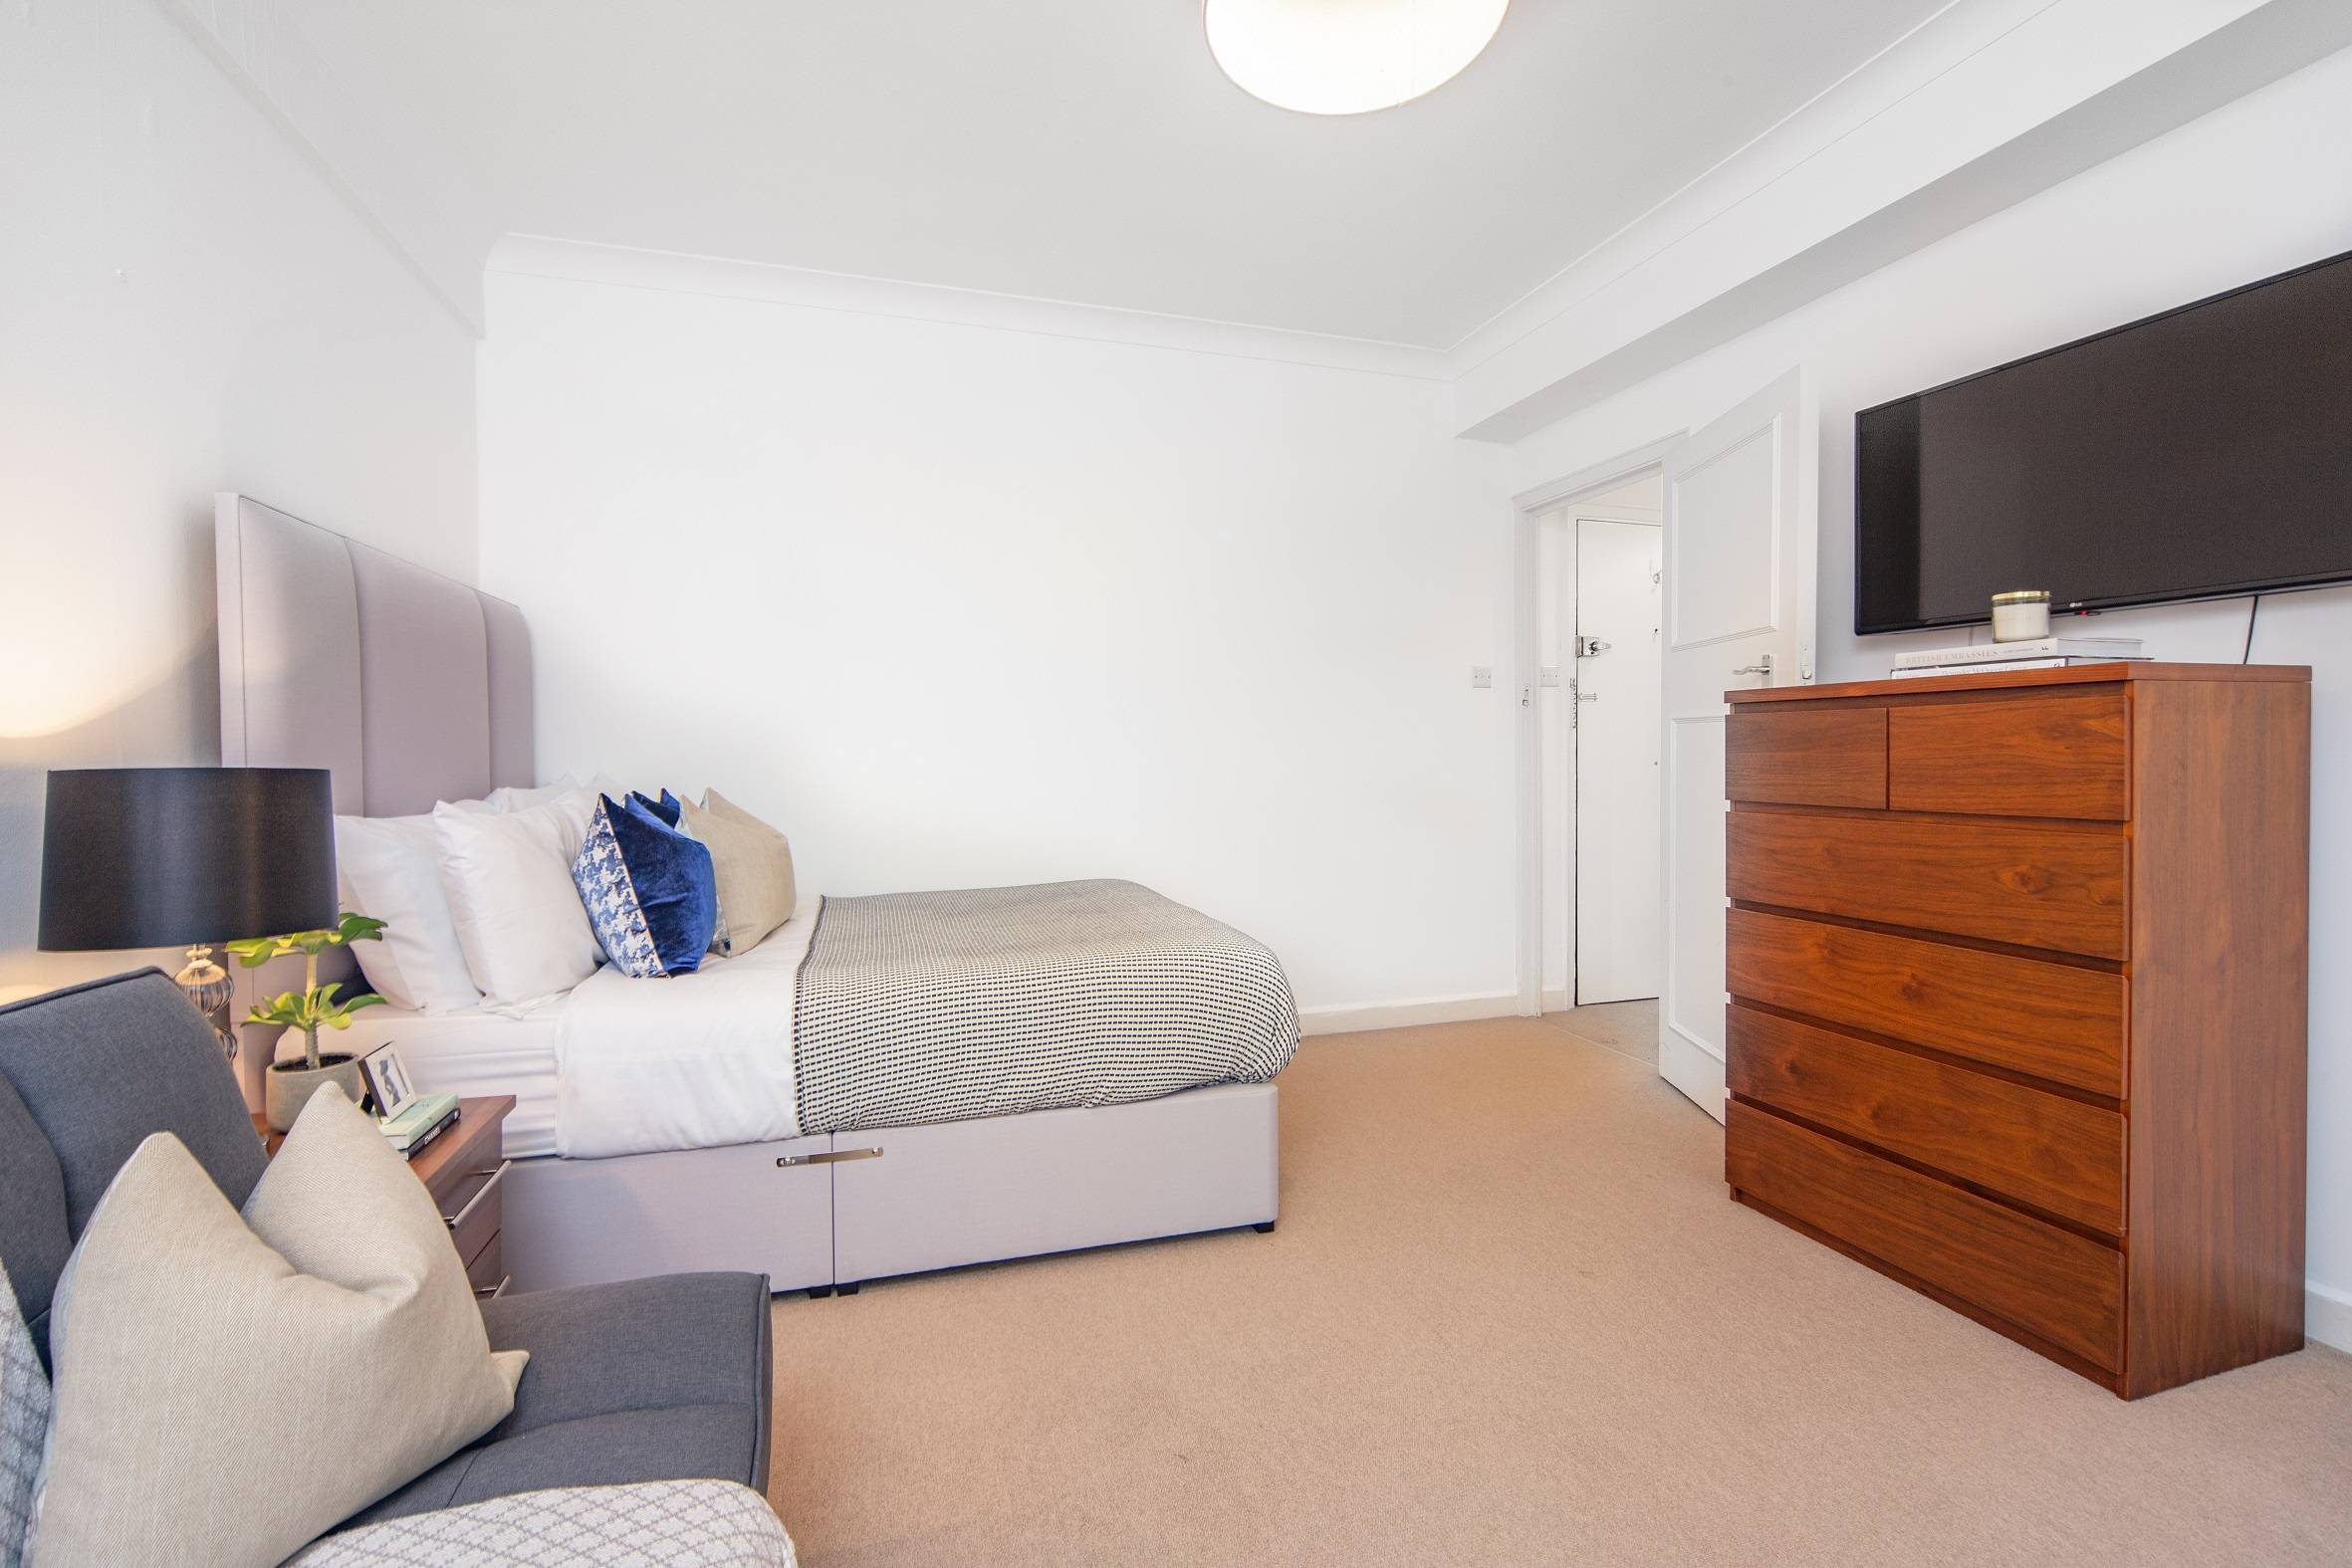 Mayfair studio apartment, furnished or unfurnished. This well-proportioned studio apartment is on the fifth floor of this beautiful red brick building, situated in the heart of London’s fashionable Mayfair, neighbouring the famous Berkeley Square.